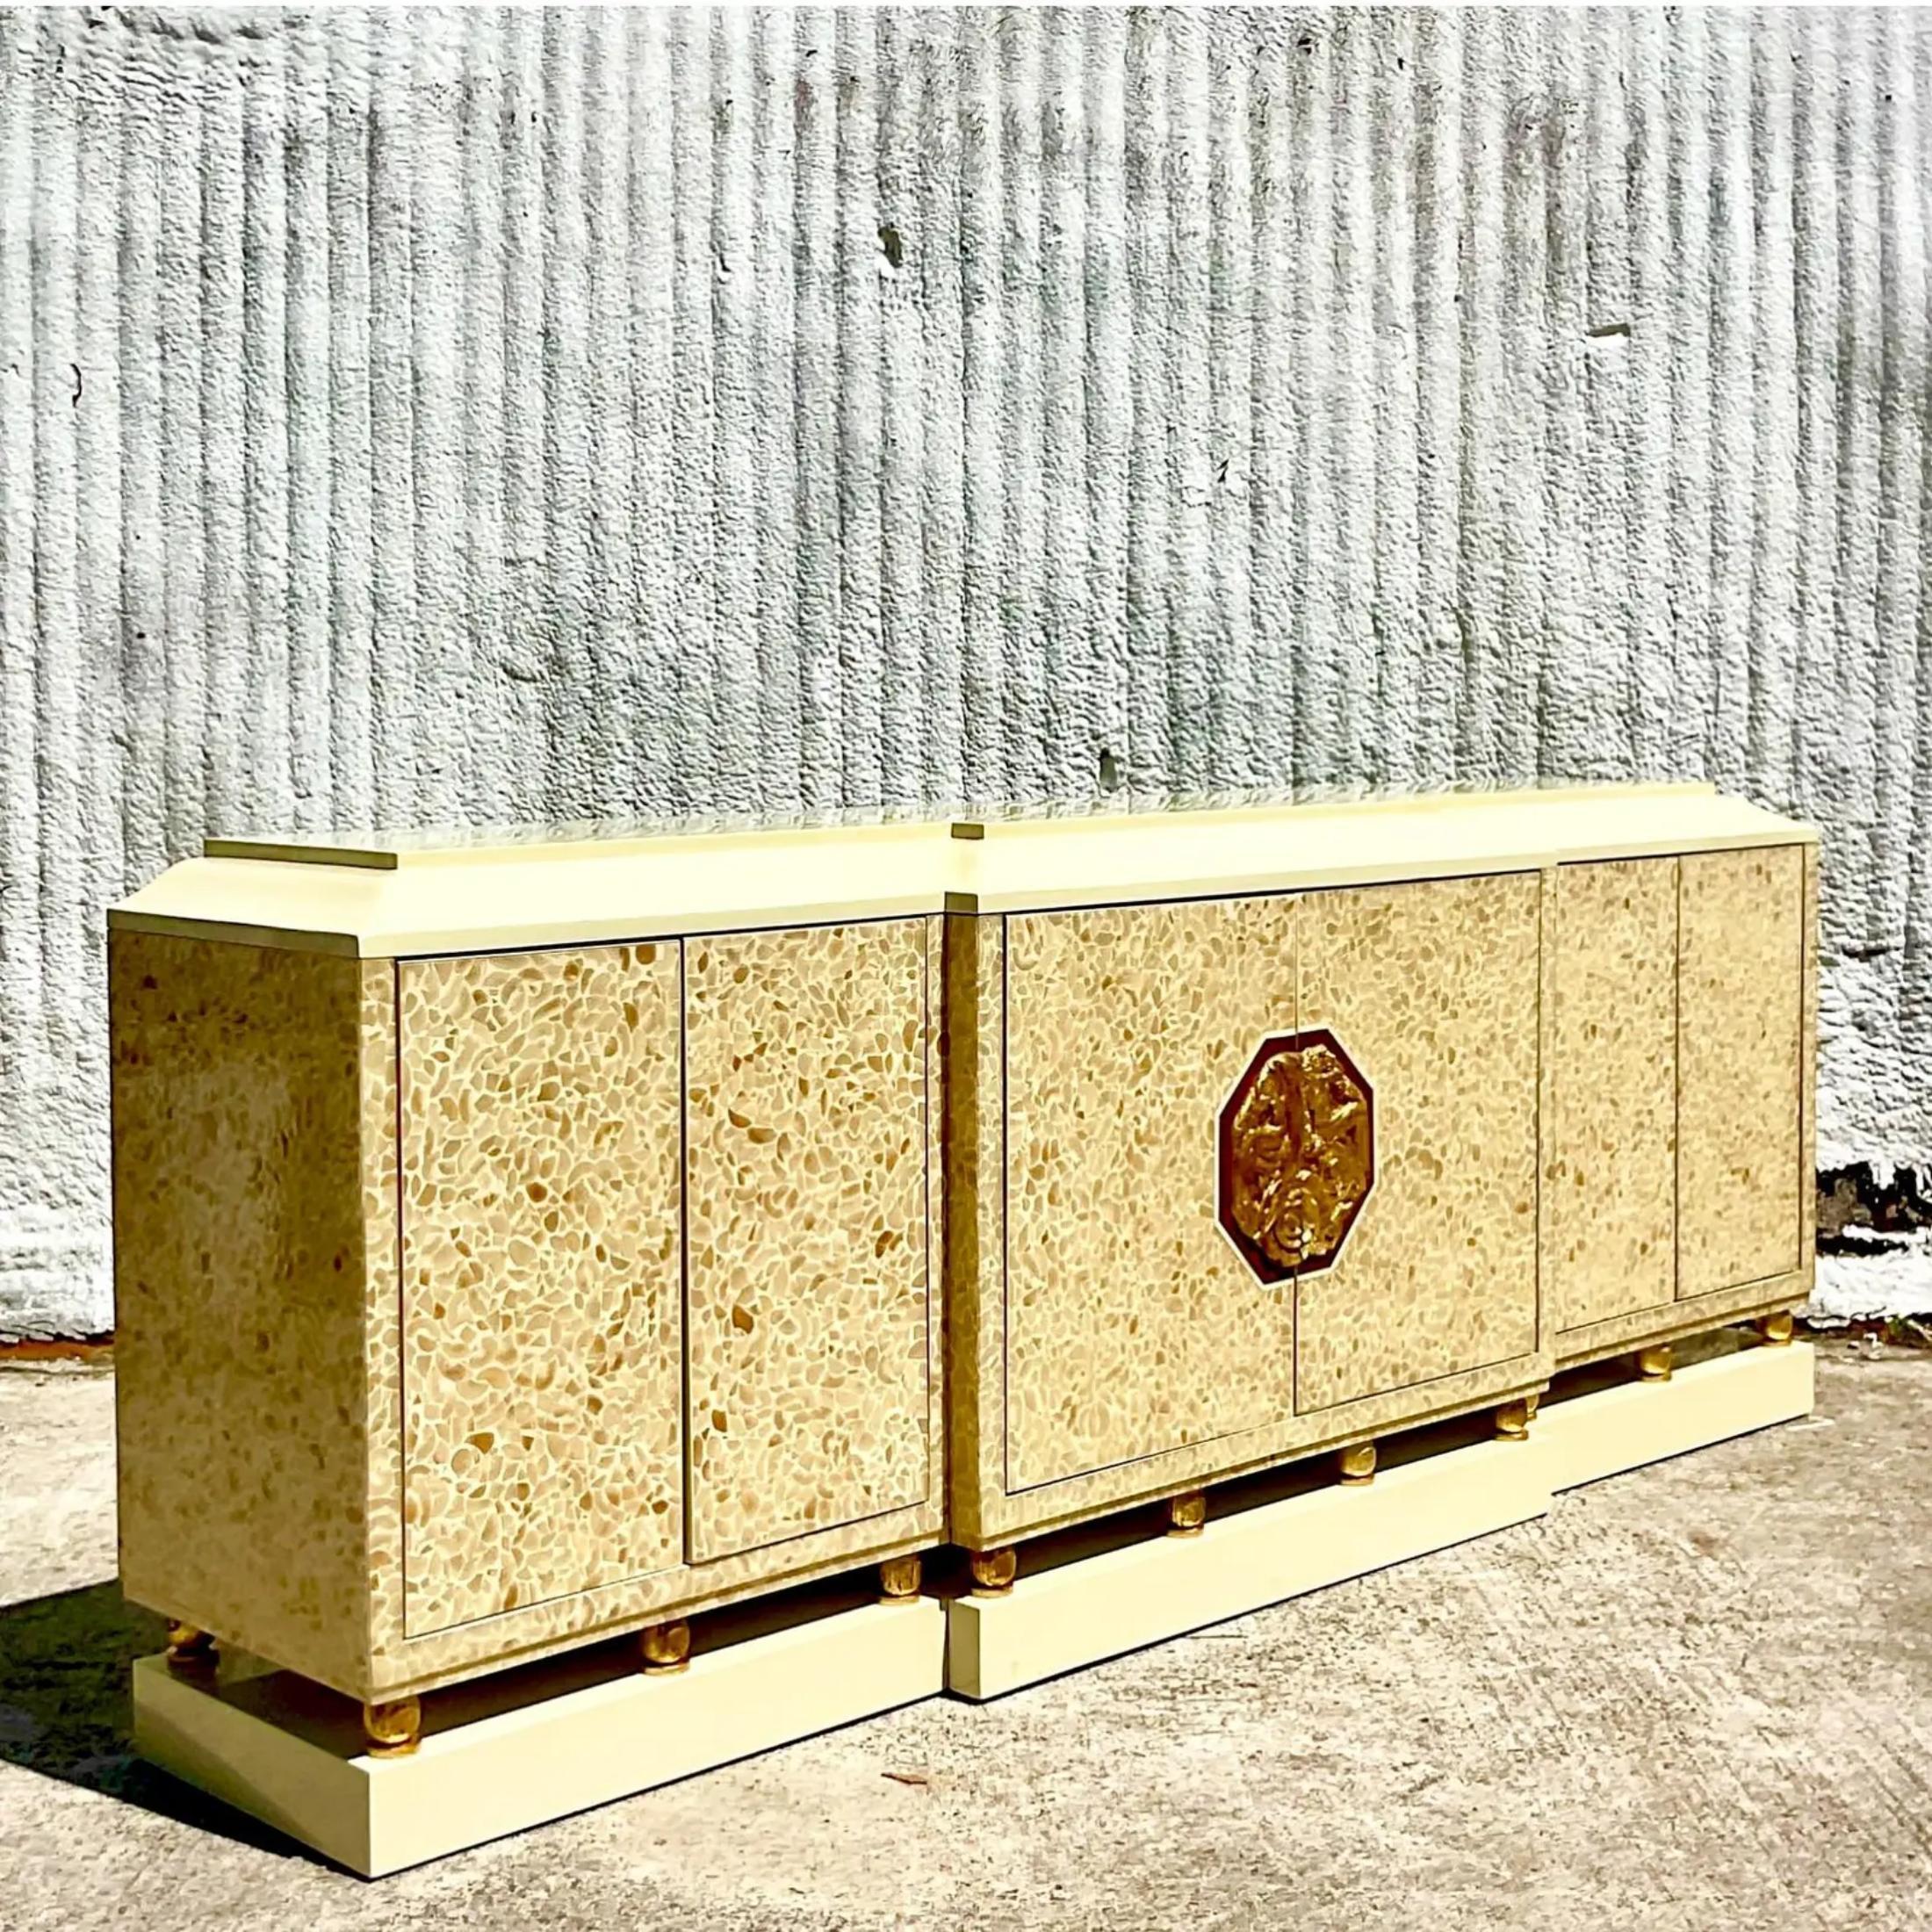 An extraordinary vintage Boho credenza. Made by the iconic Enrique Garcel and marked on the back. A chic lacquered cabinet with inlaid detail. Gold foil accents on the bottom. A stunning medallion center handle. Acquired from a Palm Beach estate